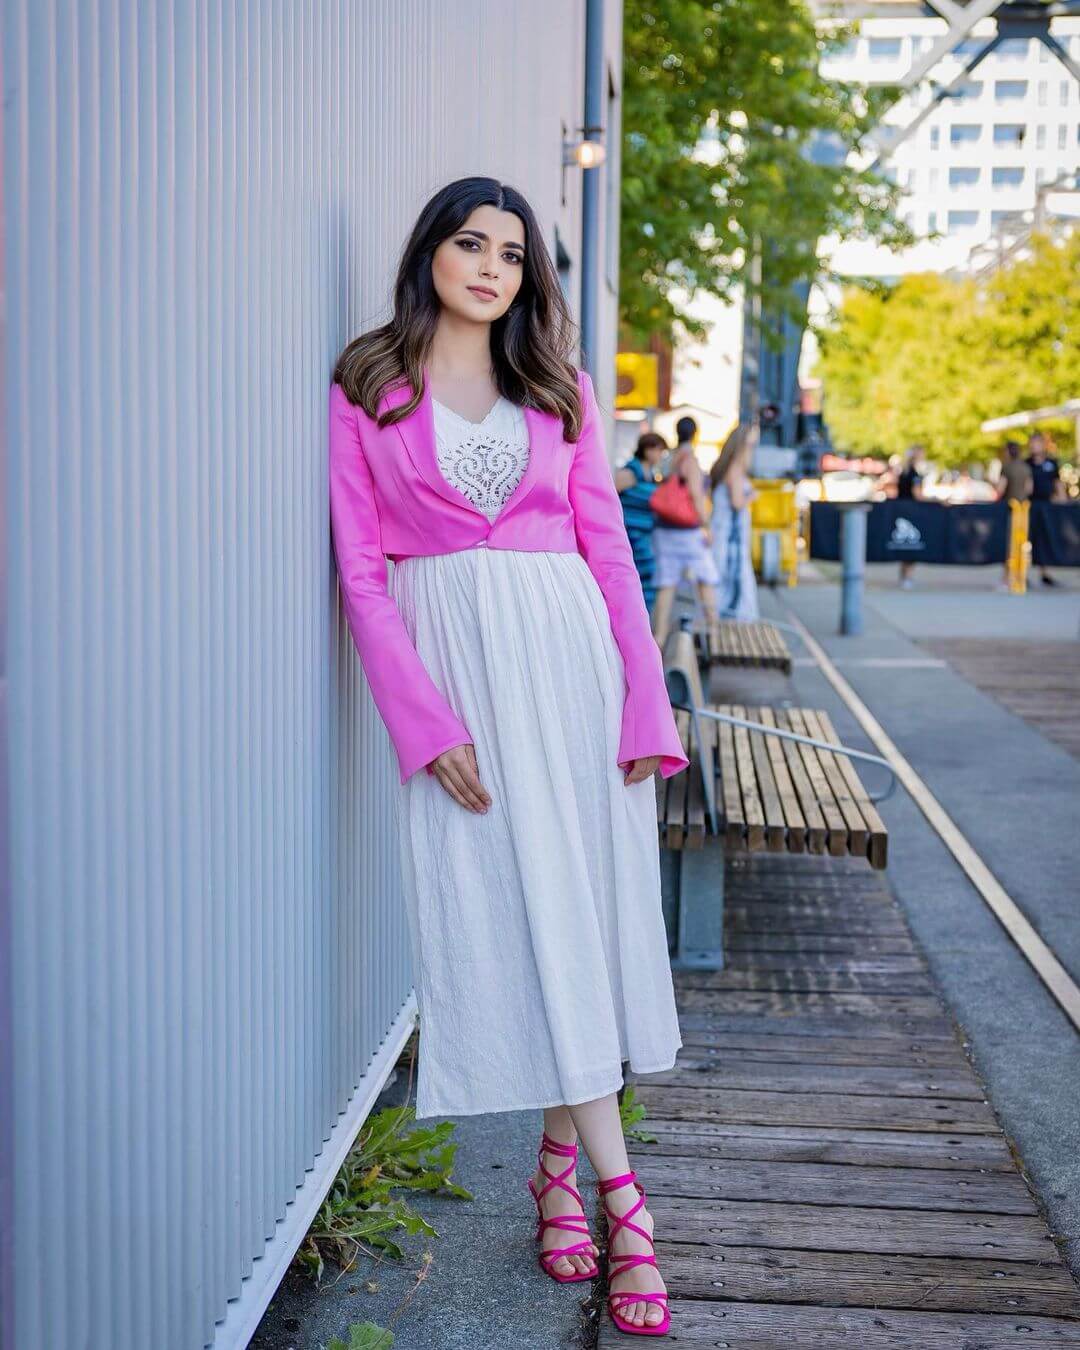 Nimrat Khaira Vibrant Look In White Dress With Pink Jacket Outfit Nimrat Khaira Desi And Classy Outfit